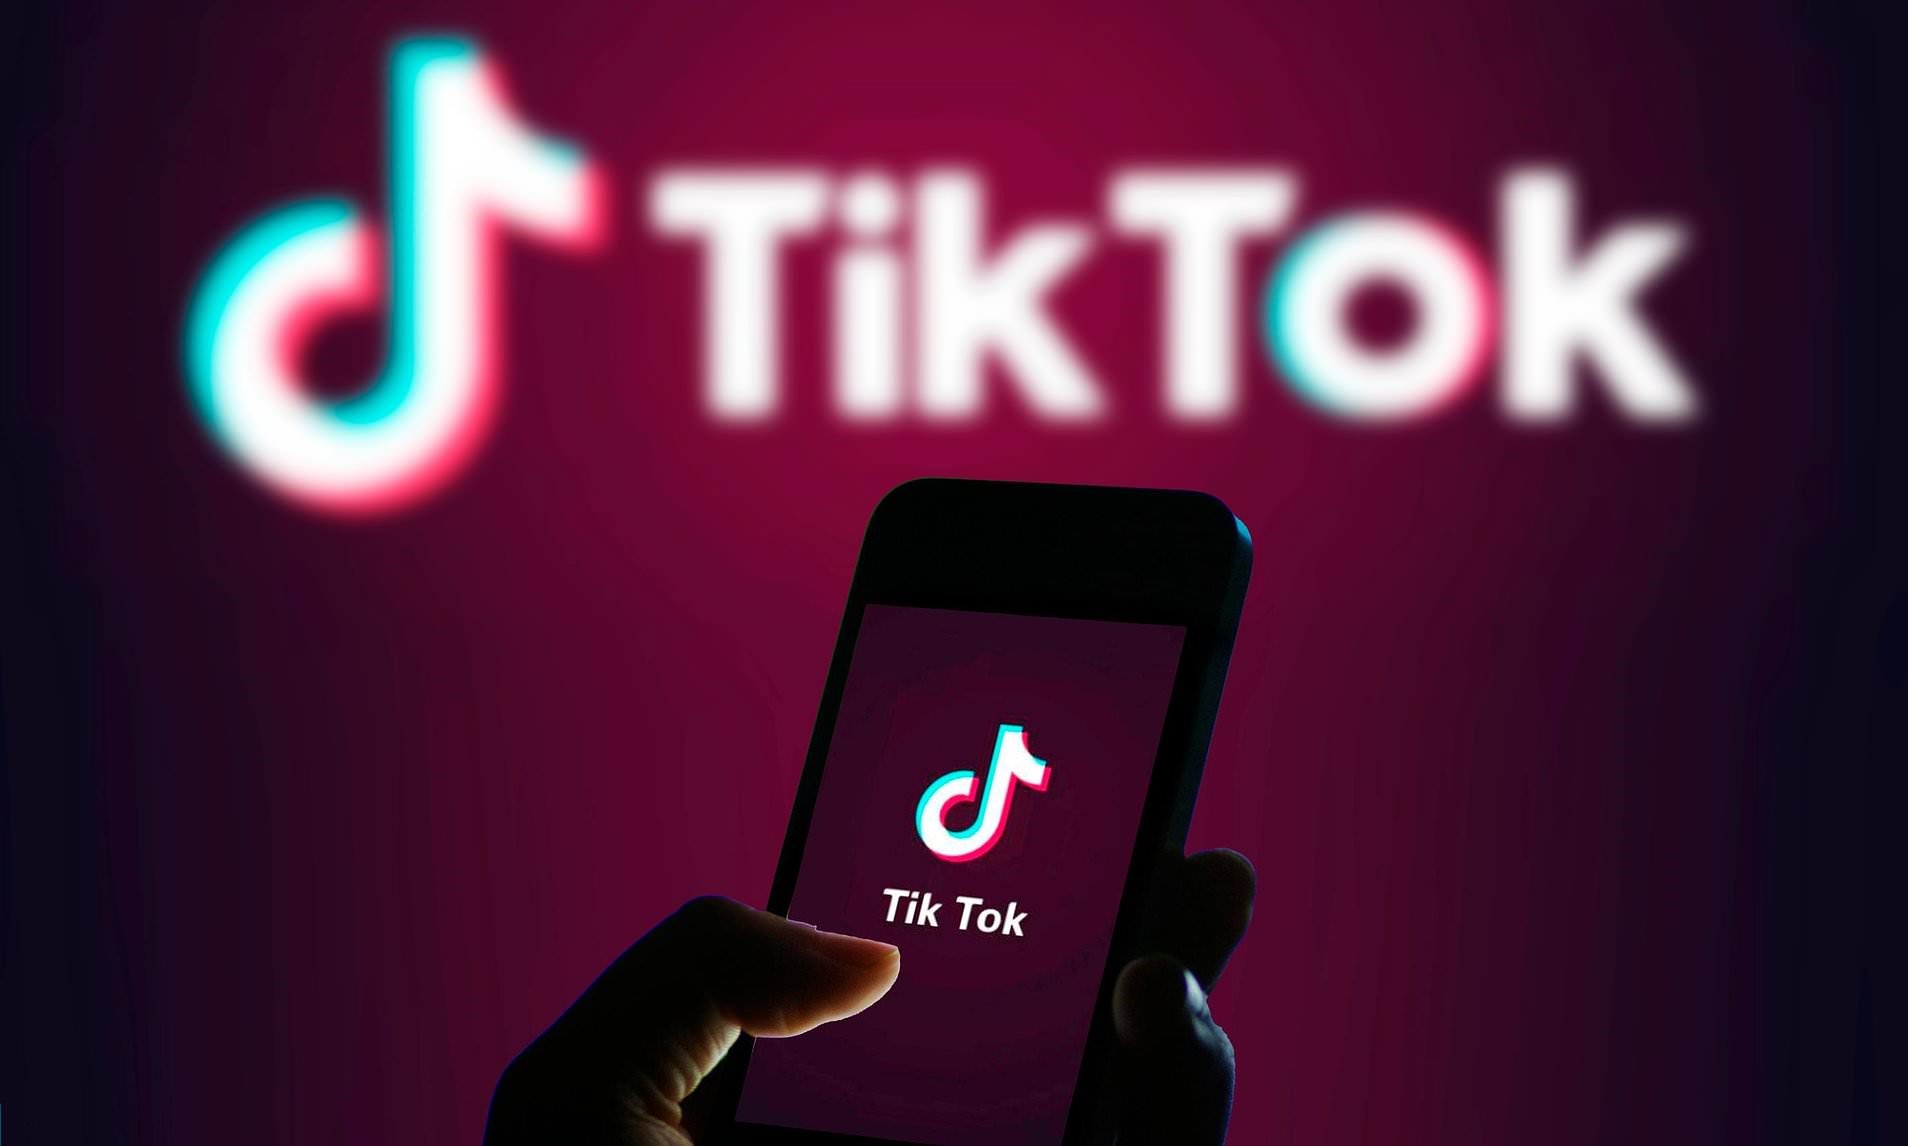 What is known about Tiktok and what is the reason for its popularity